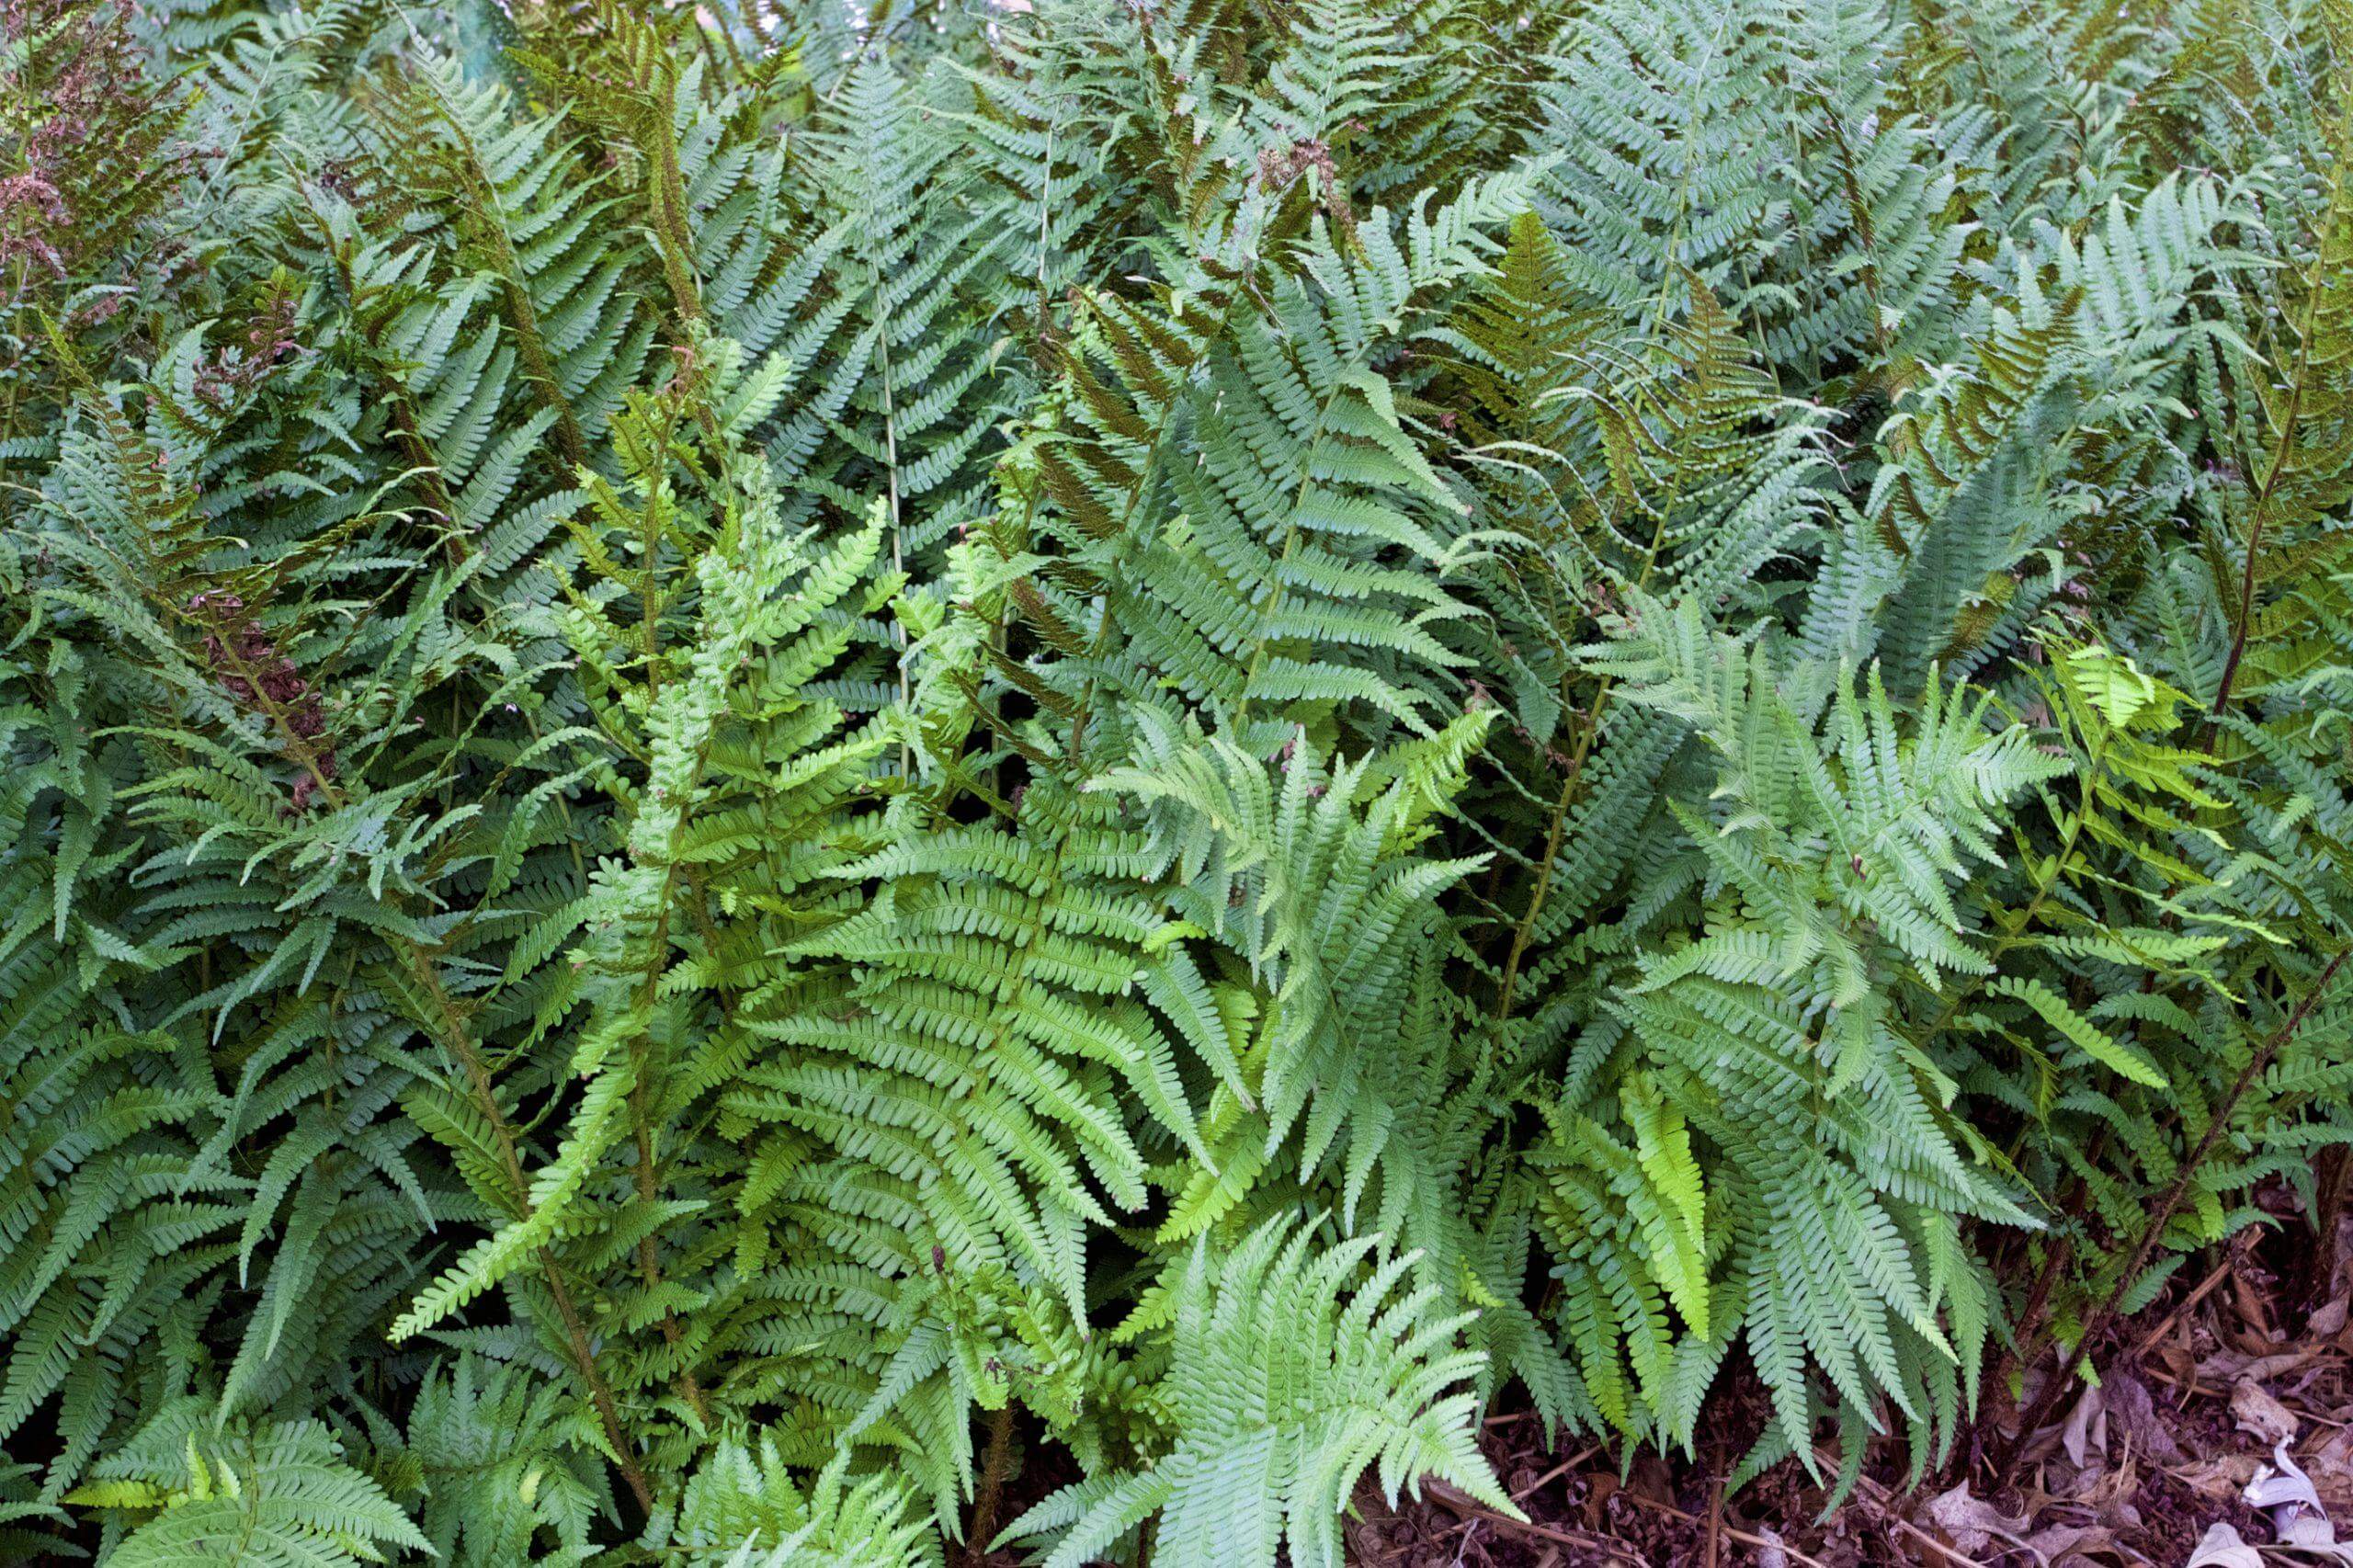 Ferns growing wildly within a garden